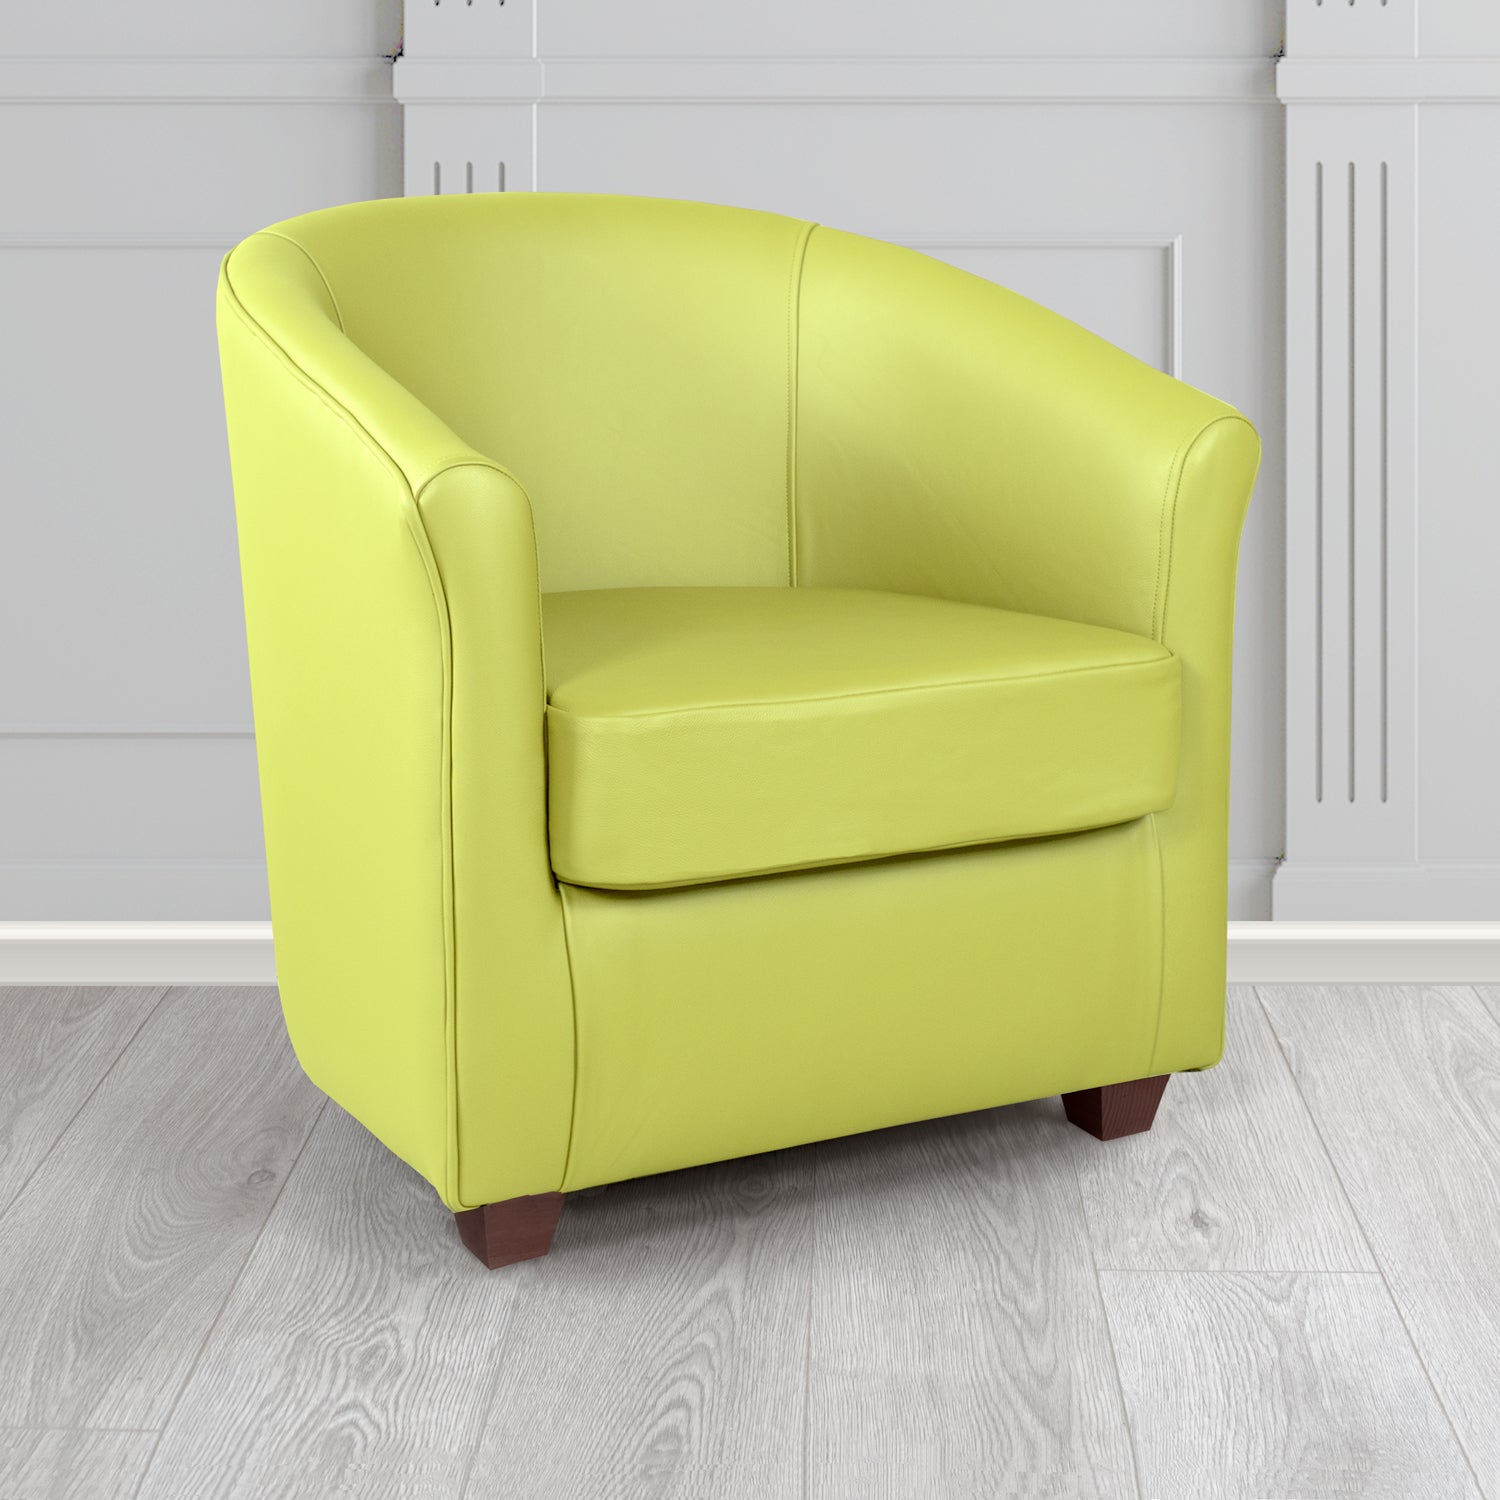 Cannes Shelly Chartreuse Crib 5 Genuine Leather Tub Chair - The Tub Chair Shop